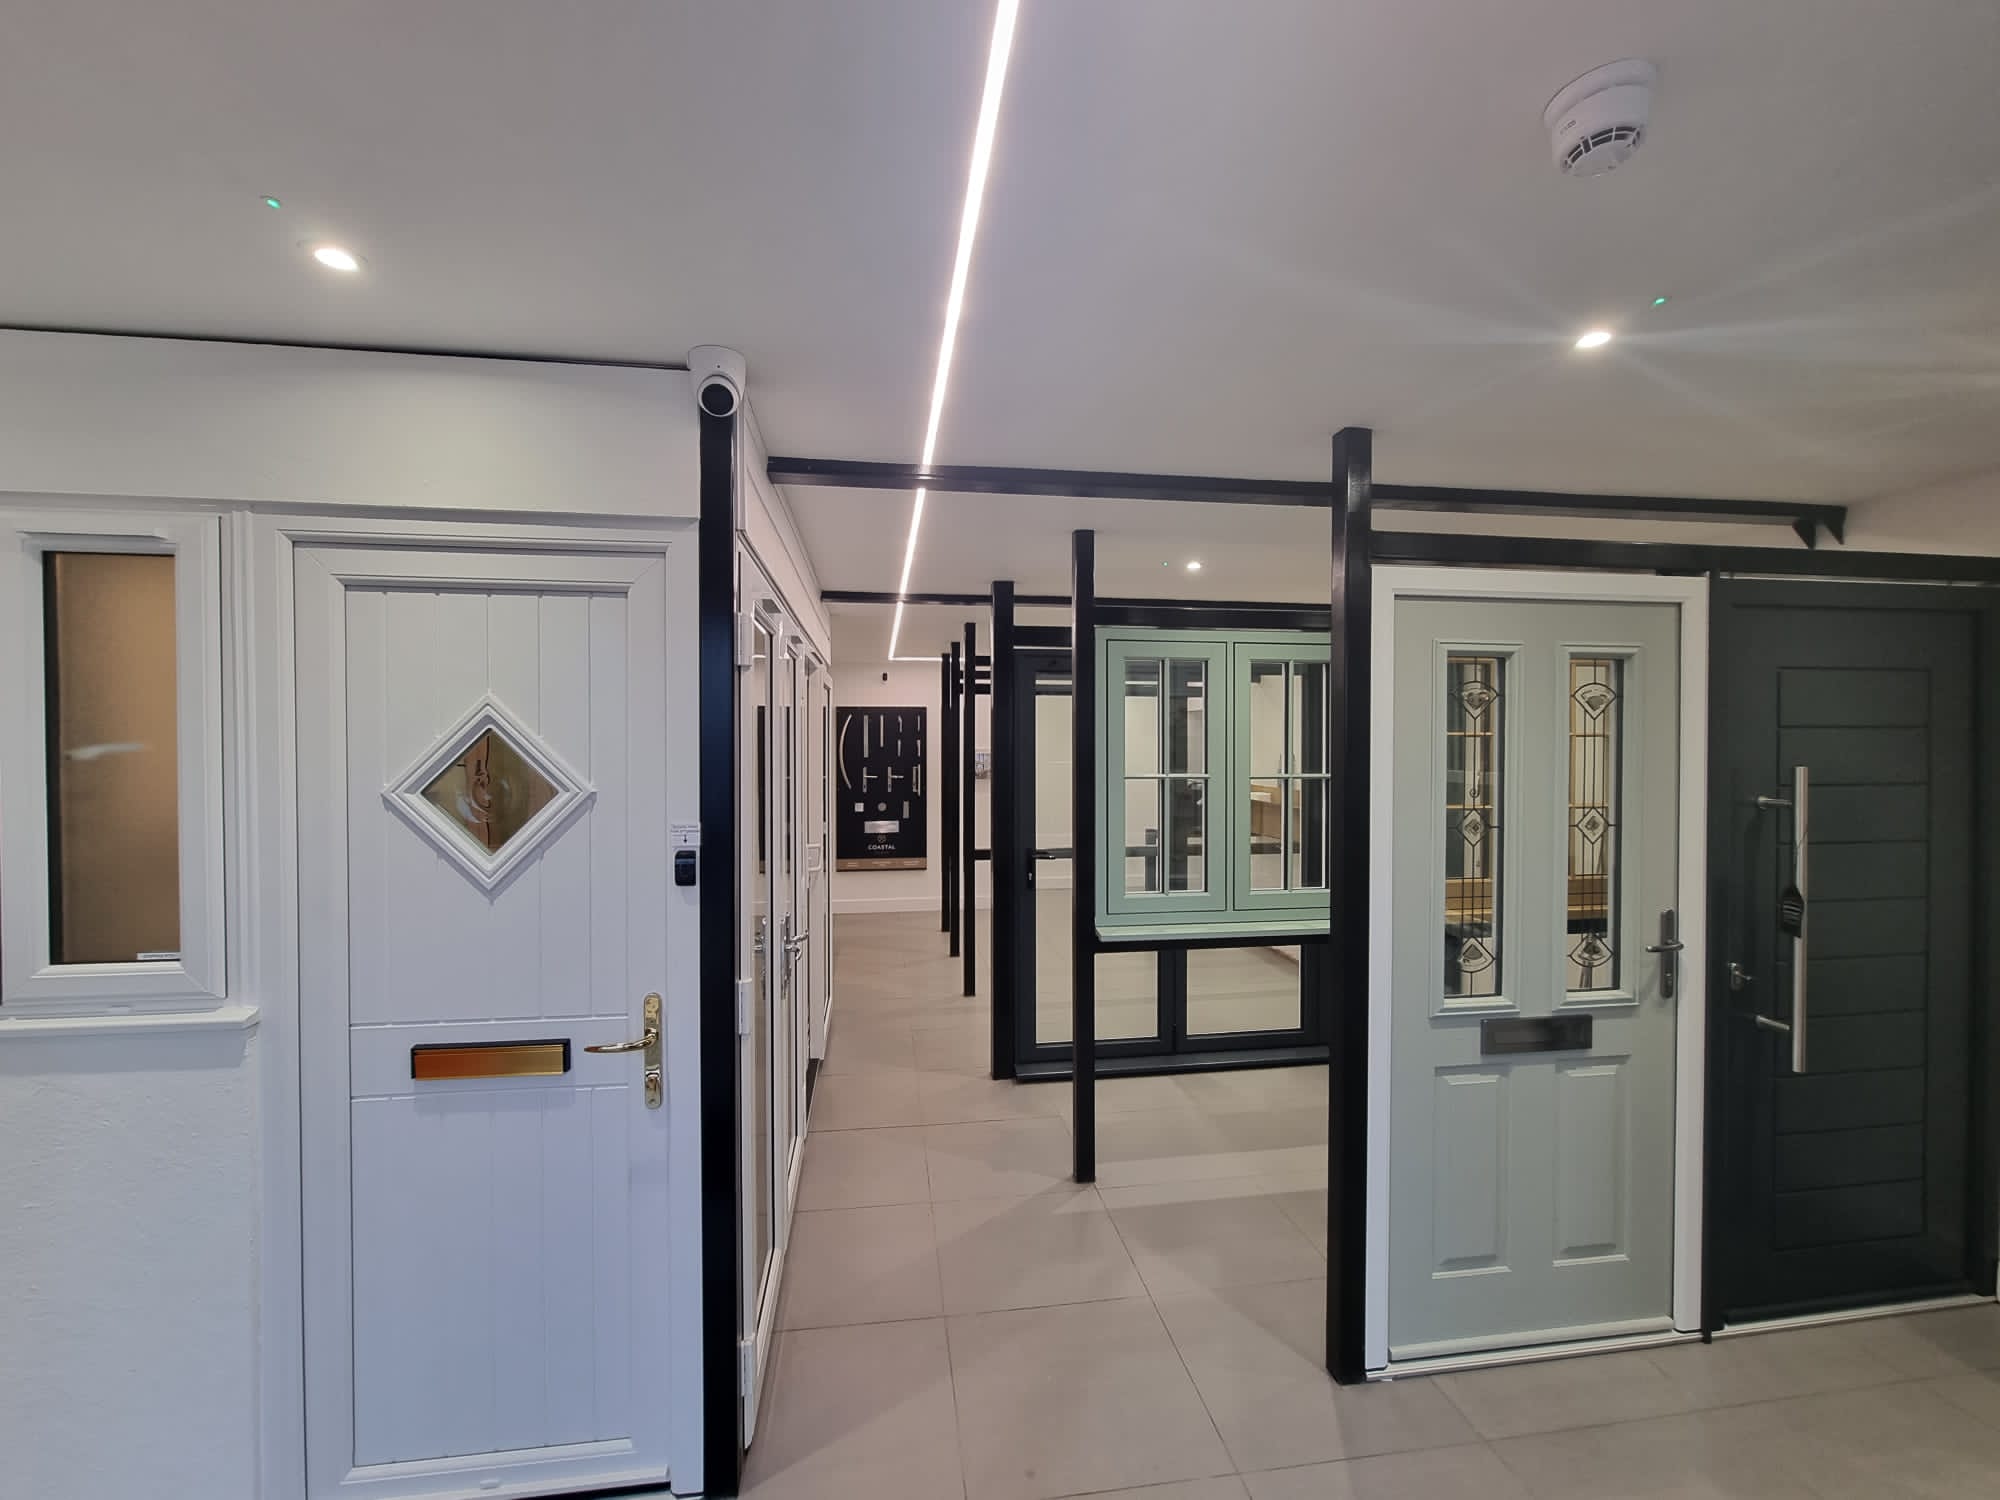 A selection of front doors in a showroom